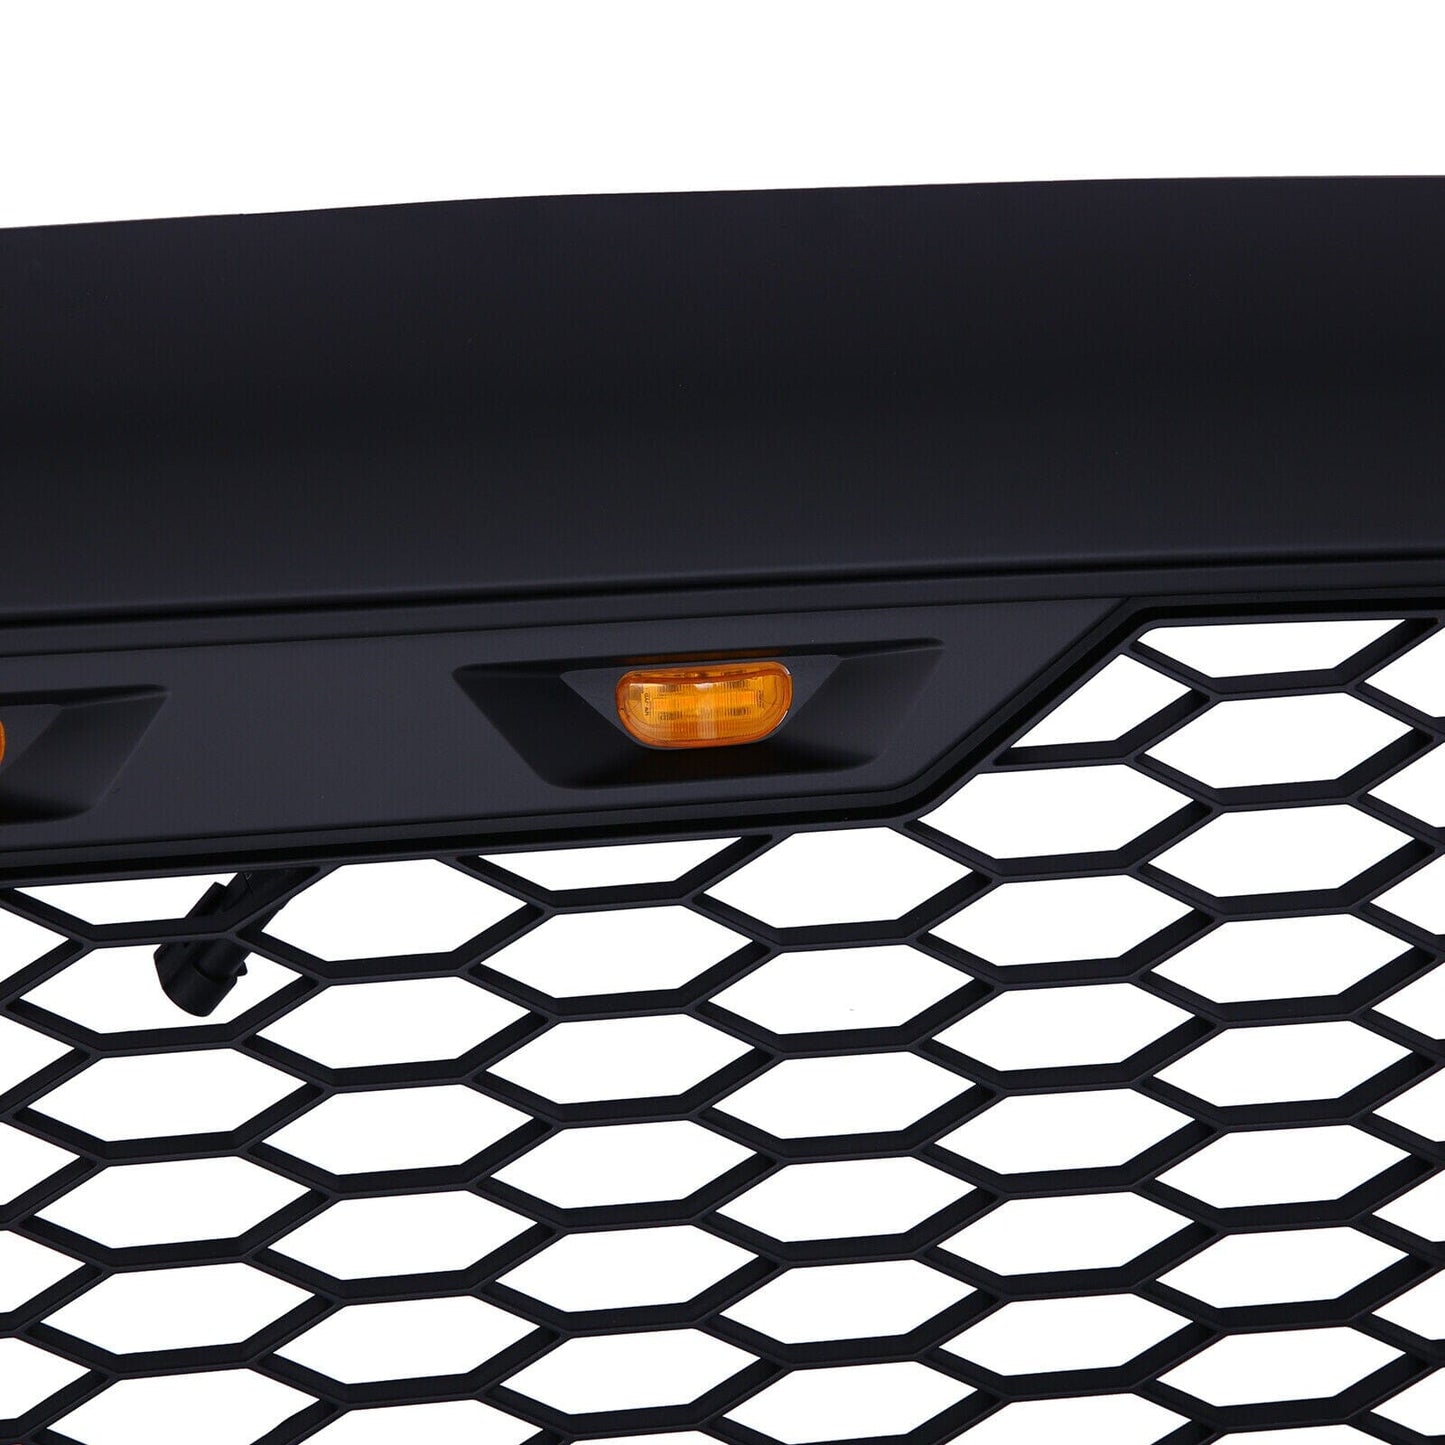 Front Upper Mesh Grille W/LED Amber Lights For 2005-2011 Toyota Tacoma